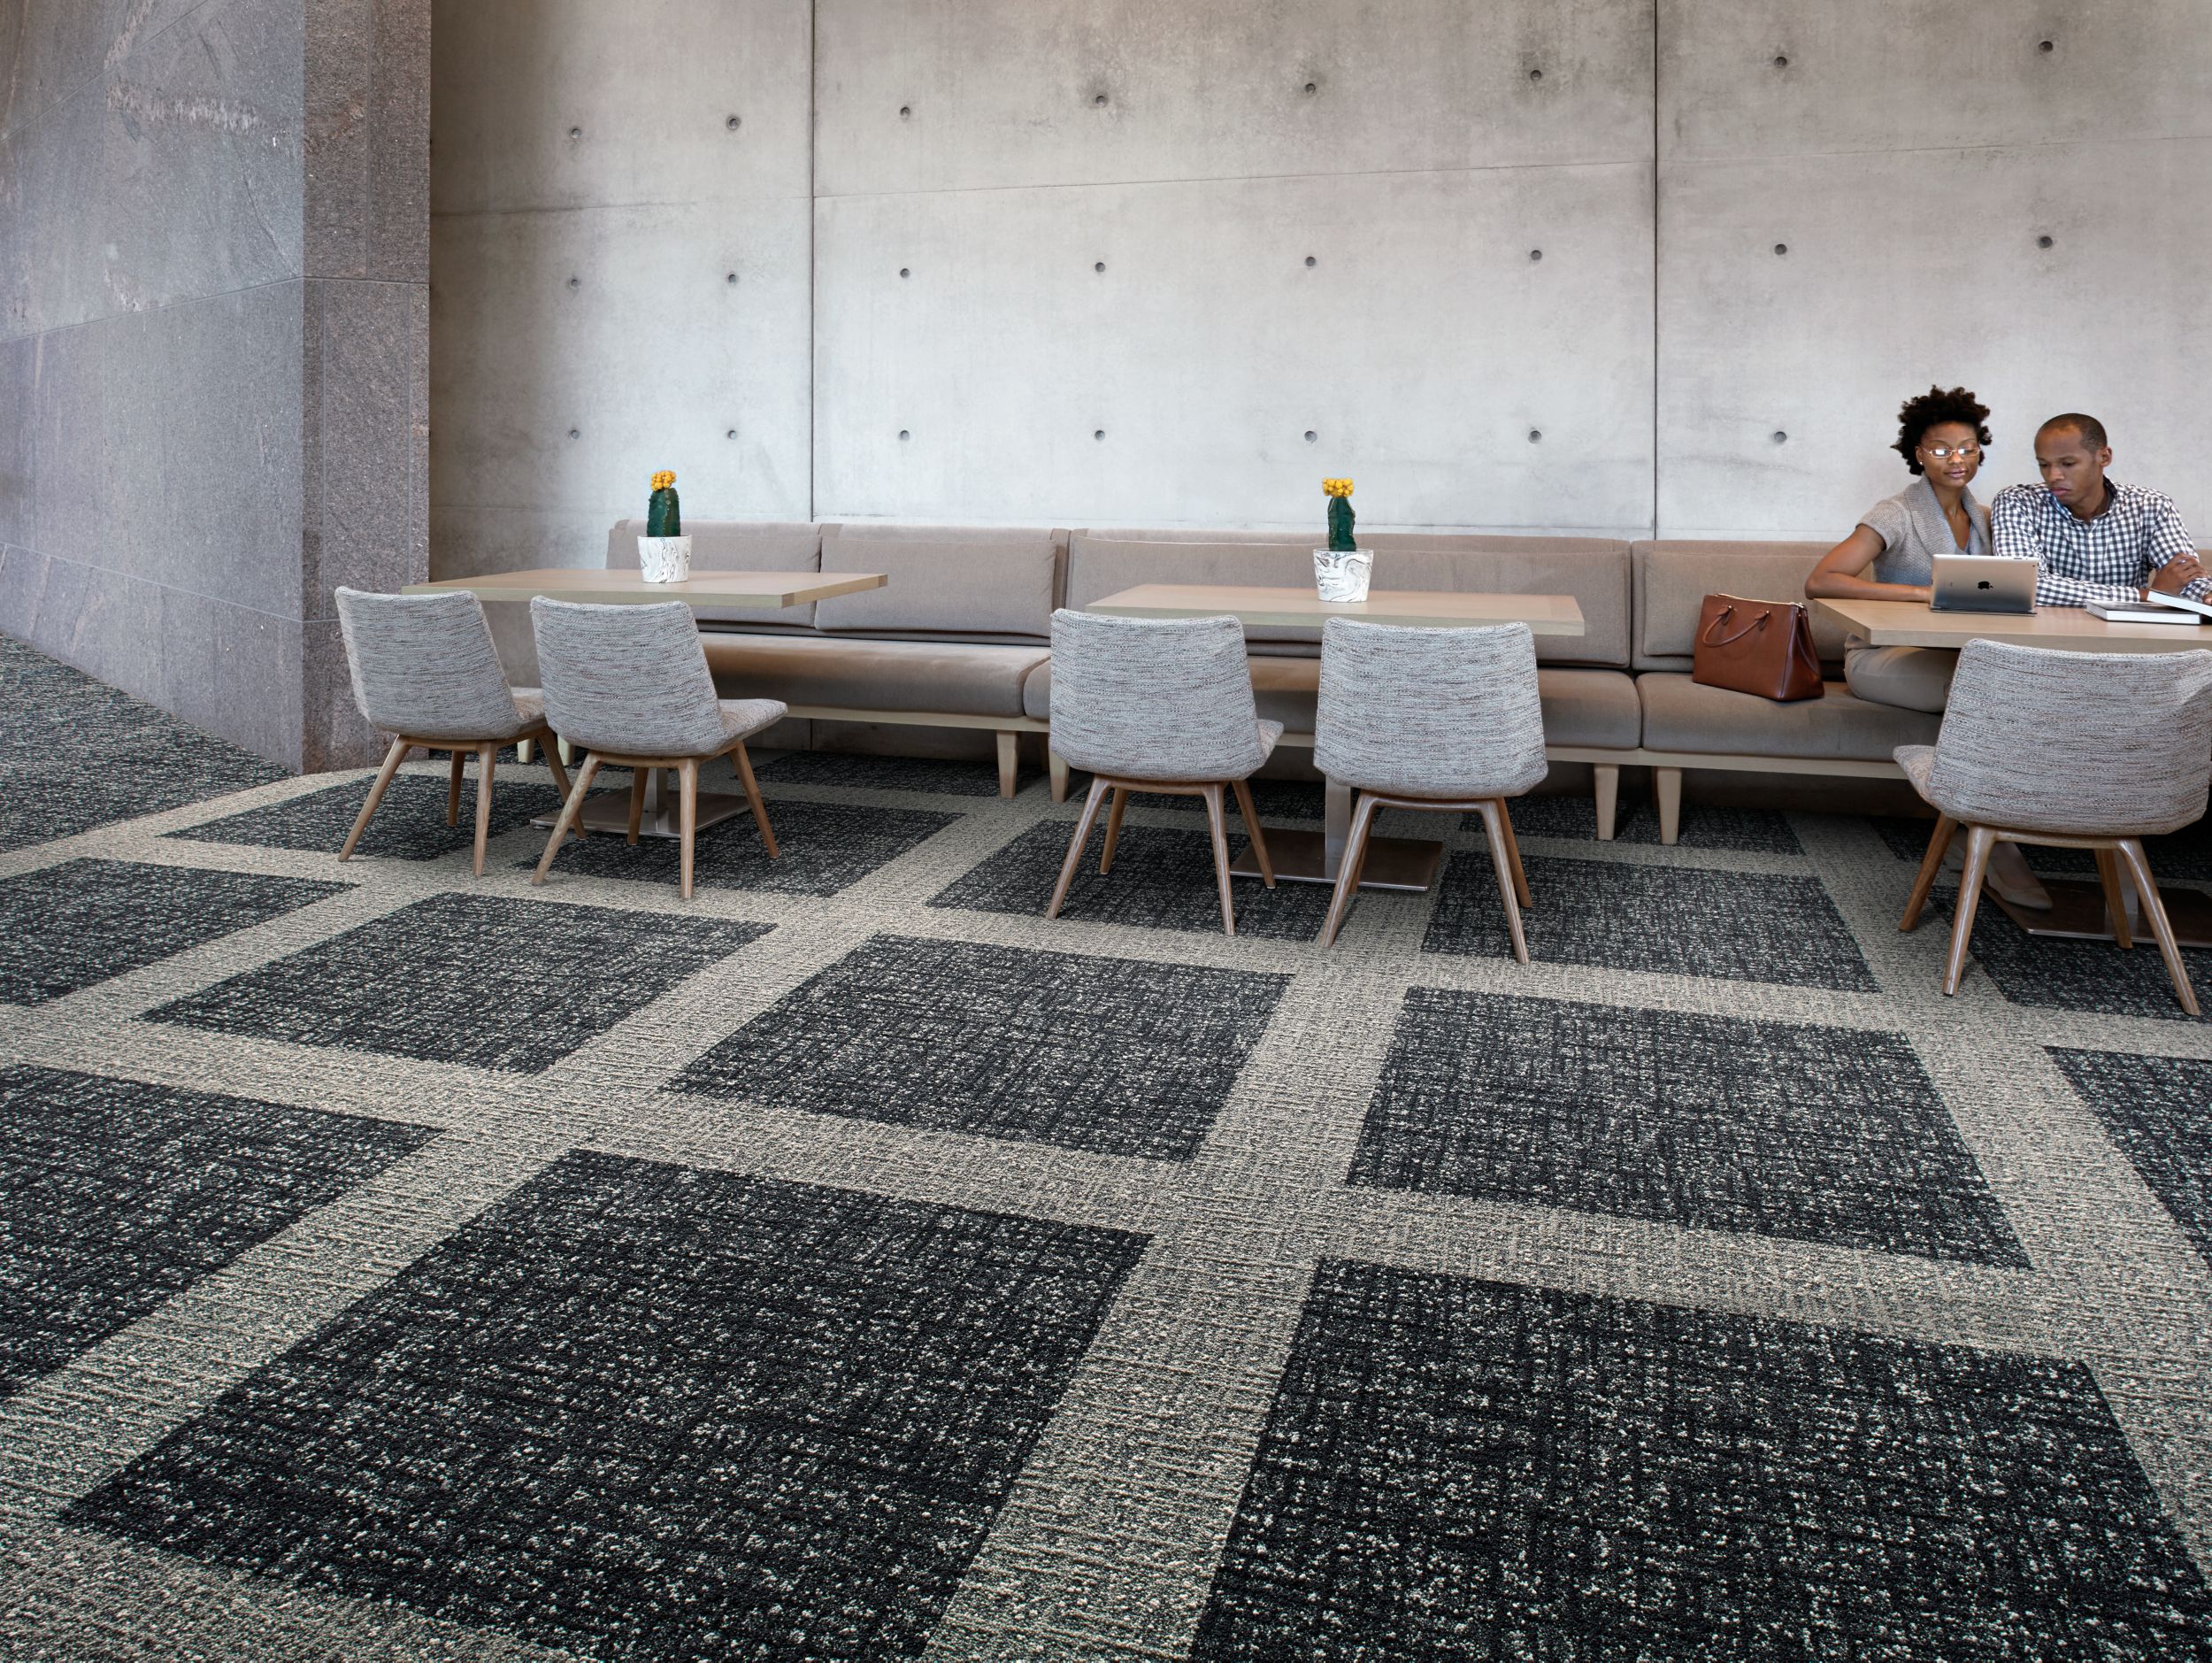 Interface WW895 plank carpet tile and Textured Woodgrains LVT in office common area with tables and chairs número de imagen 6